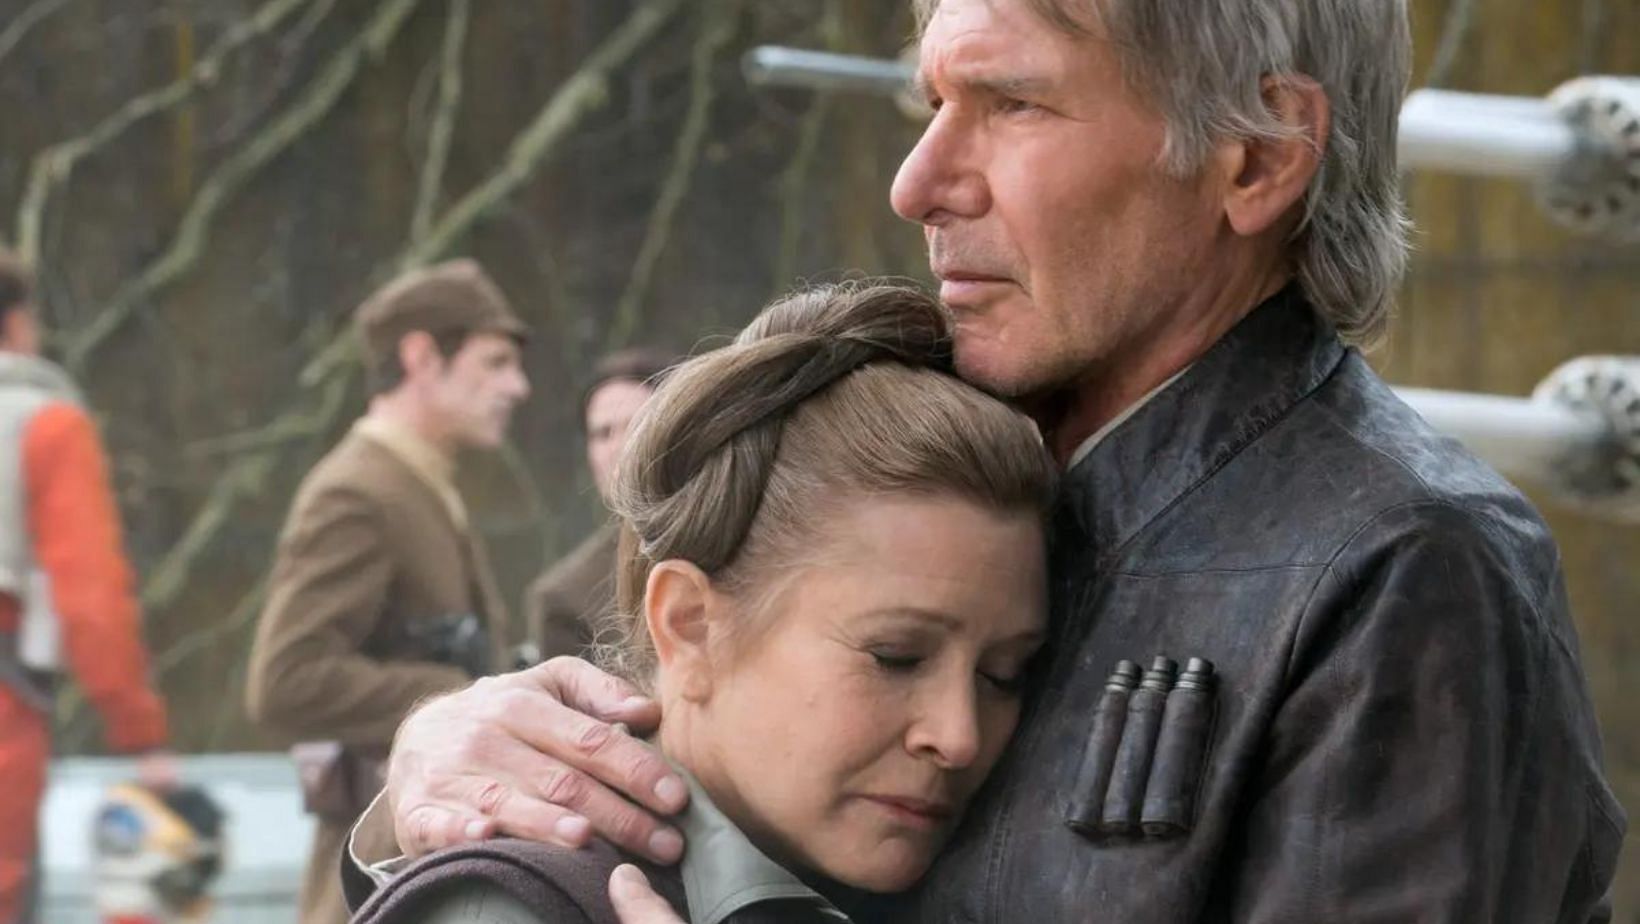 Leia taught us that love is a powerful force through Star Wars (Image via Lucasfilm)